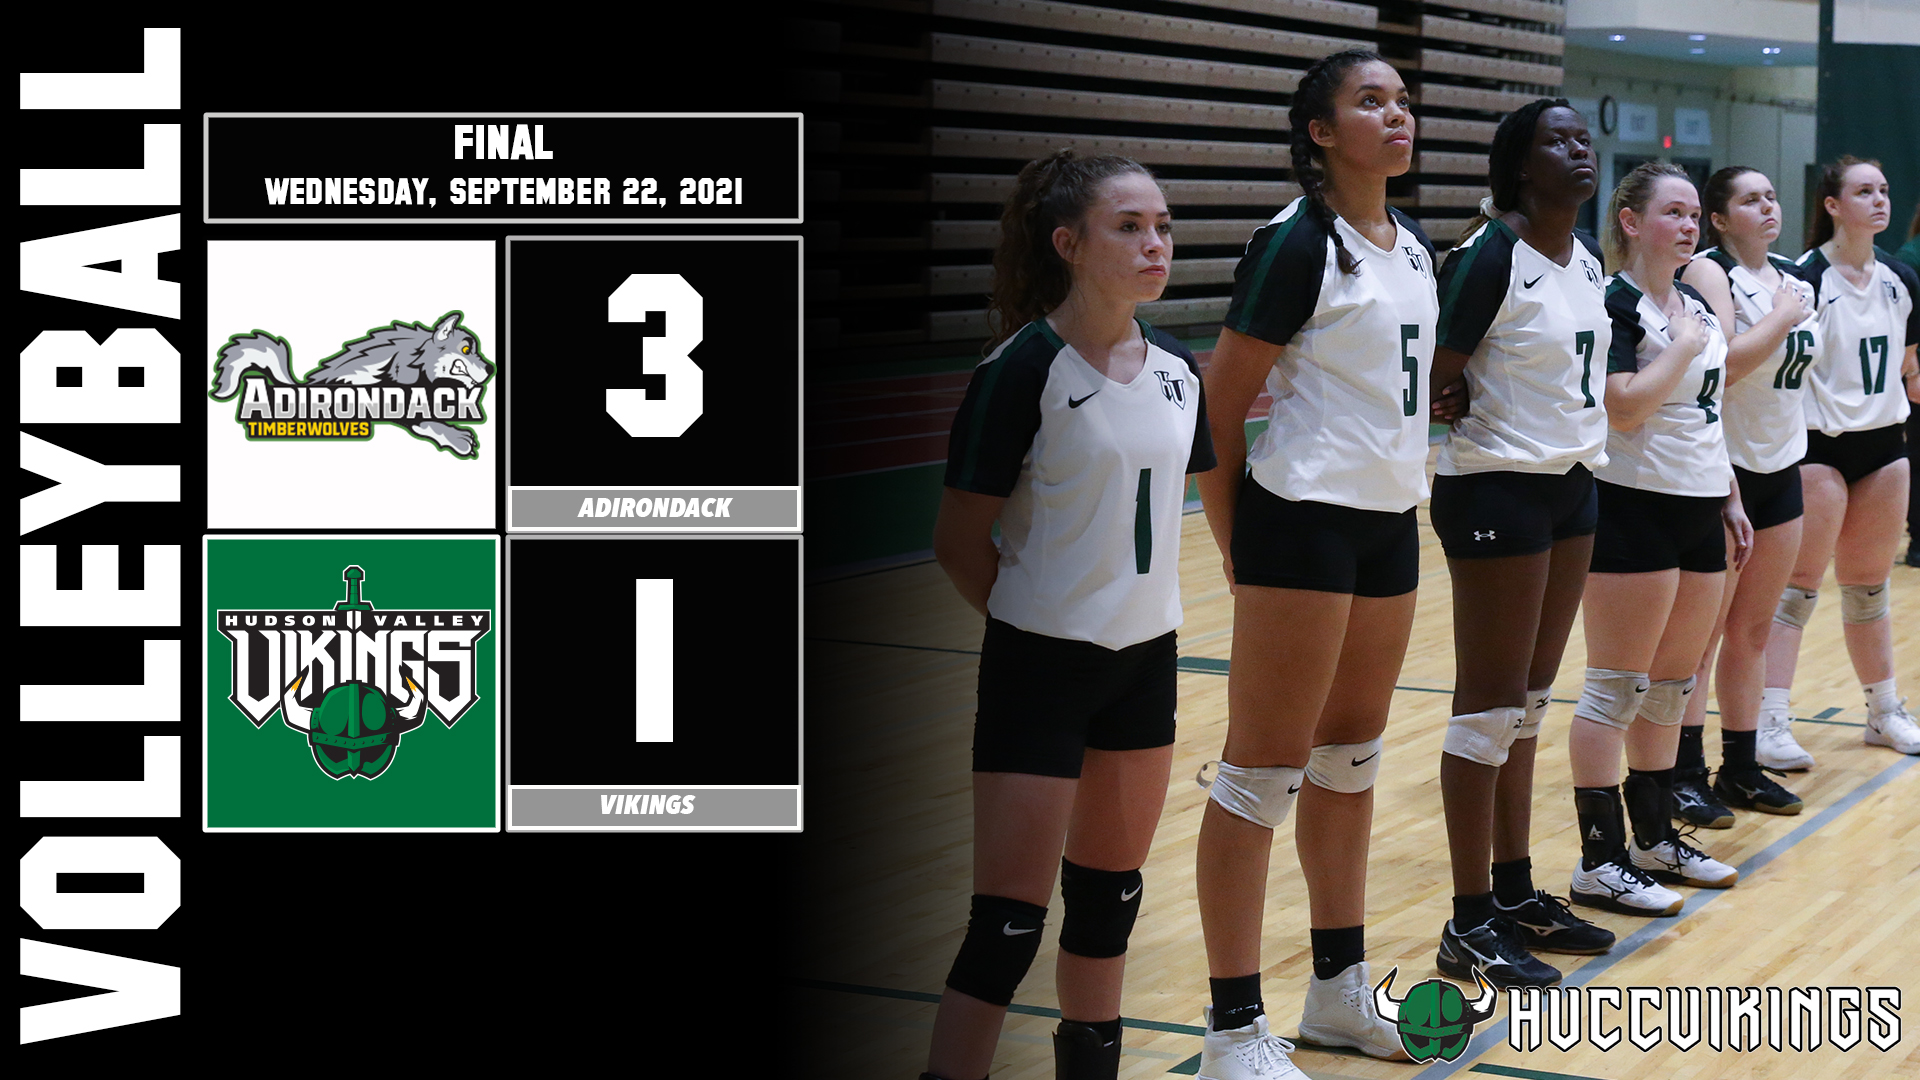 Volleyball lost 3-1 to Adirondack on 9/22/21